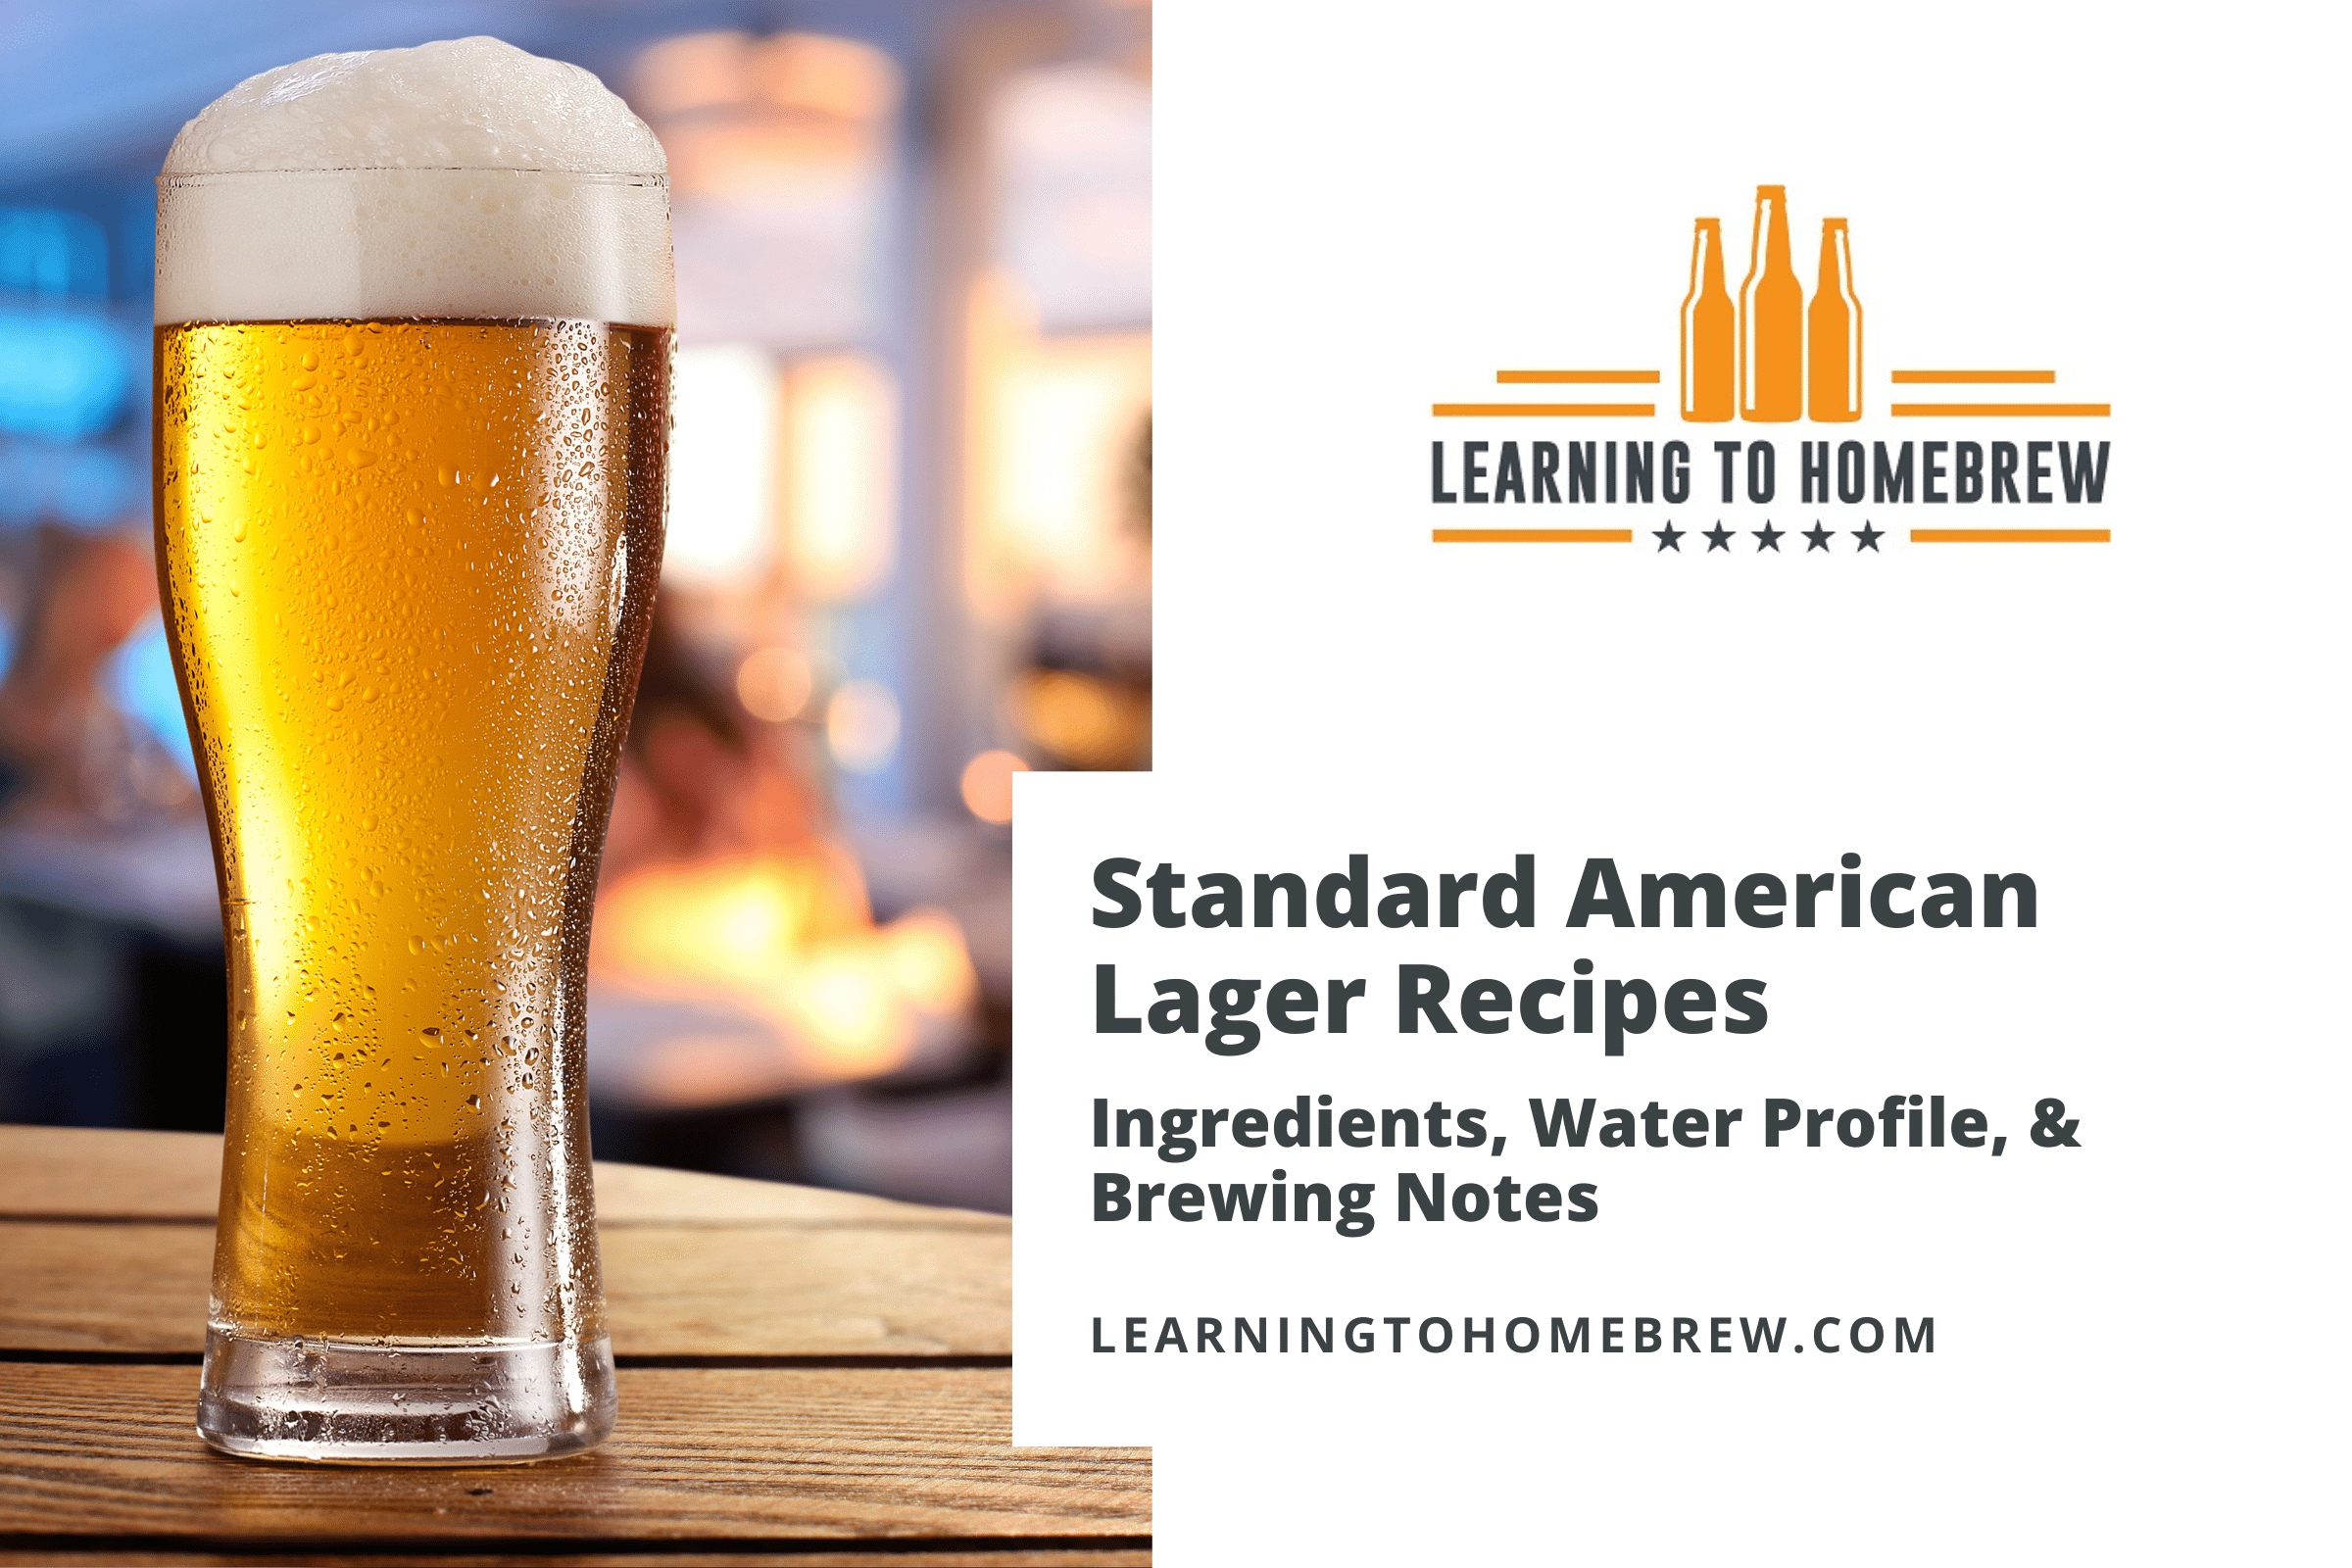 Standard American Lager Recipes - Ingredients, Water Profile, & Brewing Notes